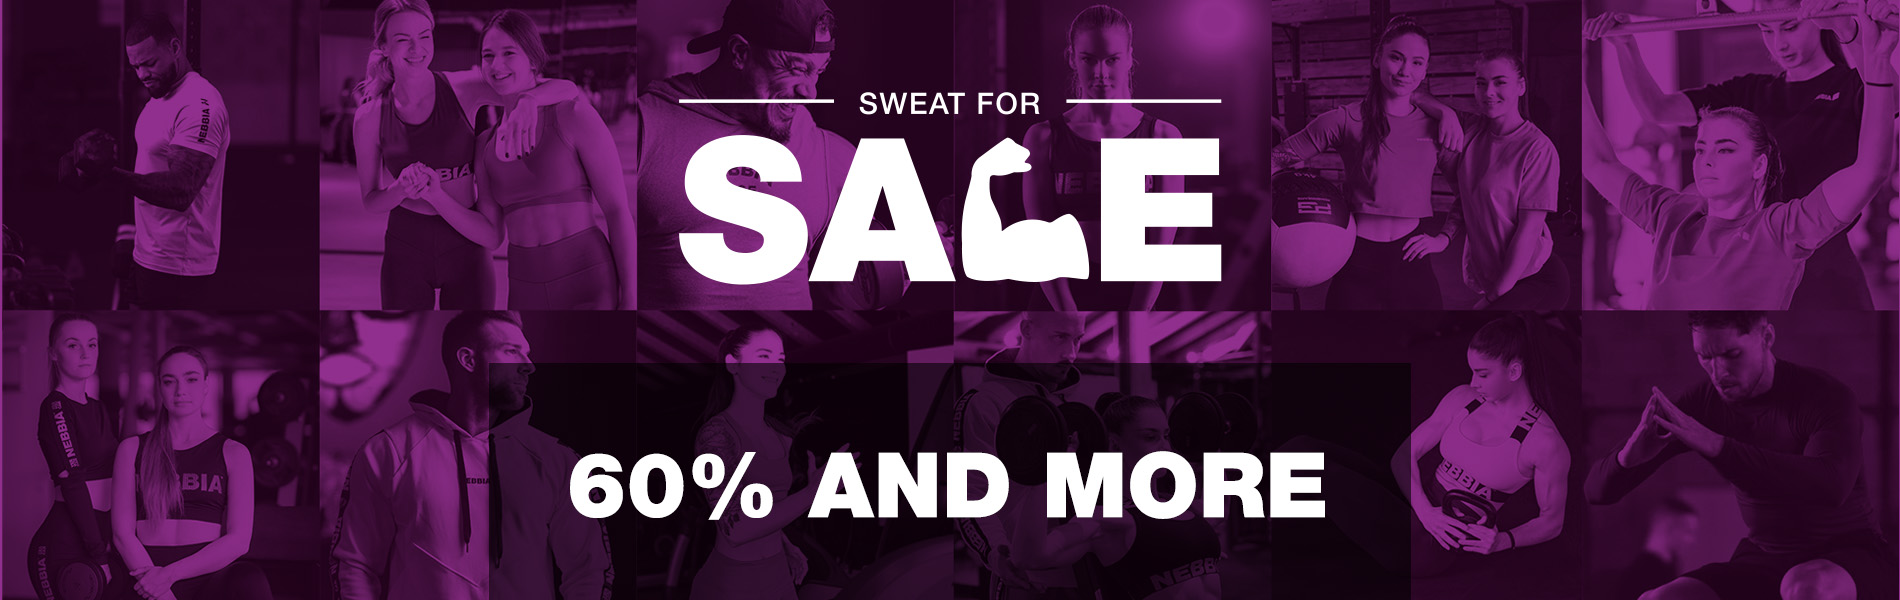 SWEAT FOR SALE -60% and more